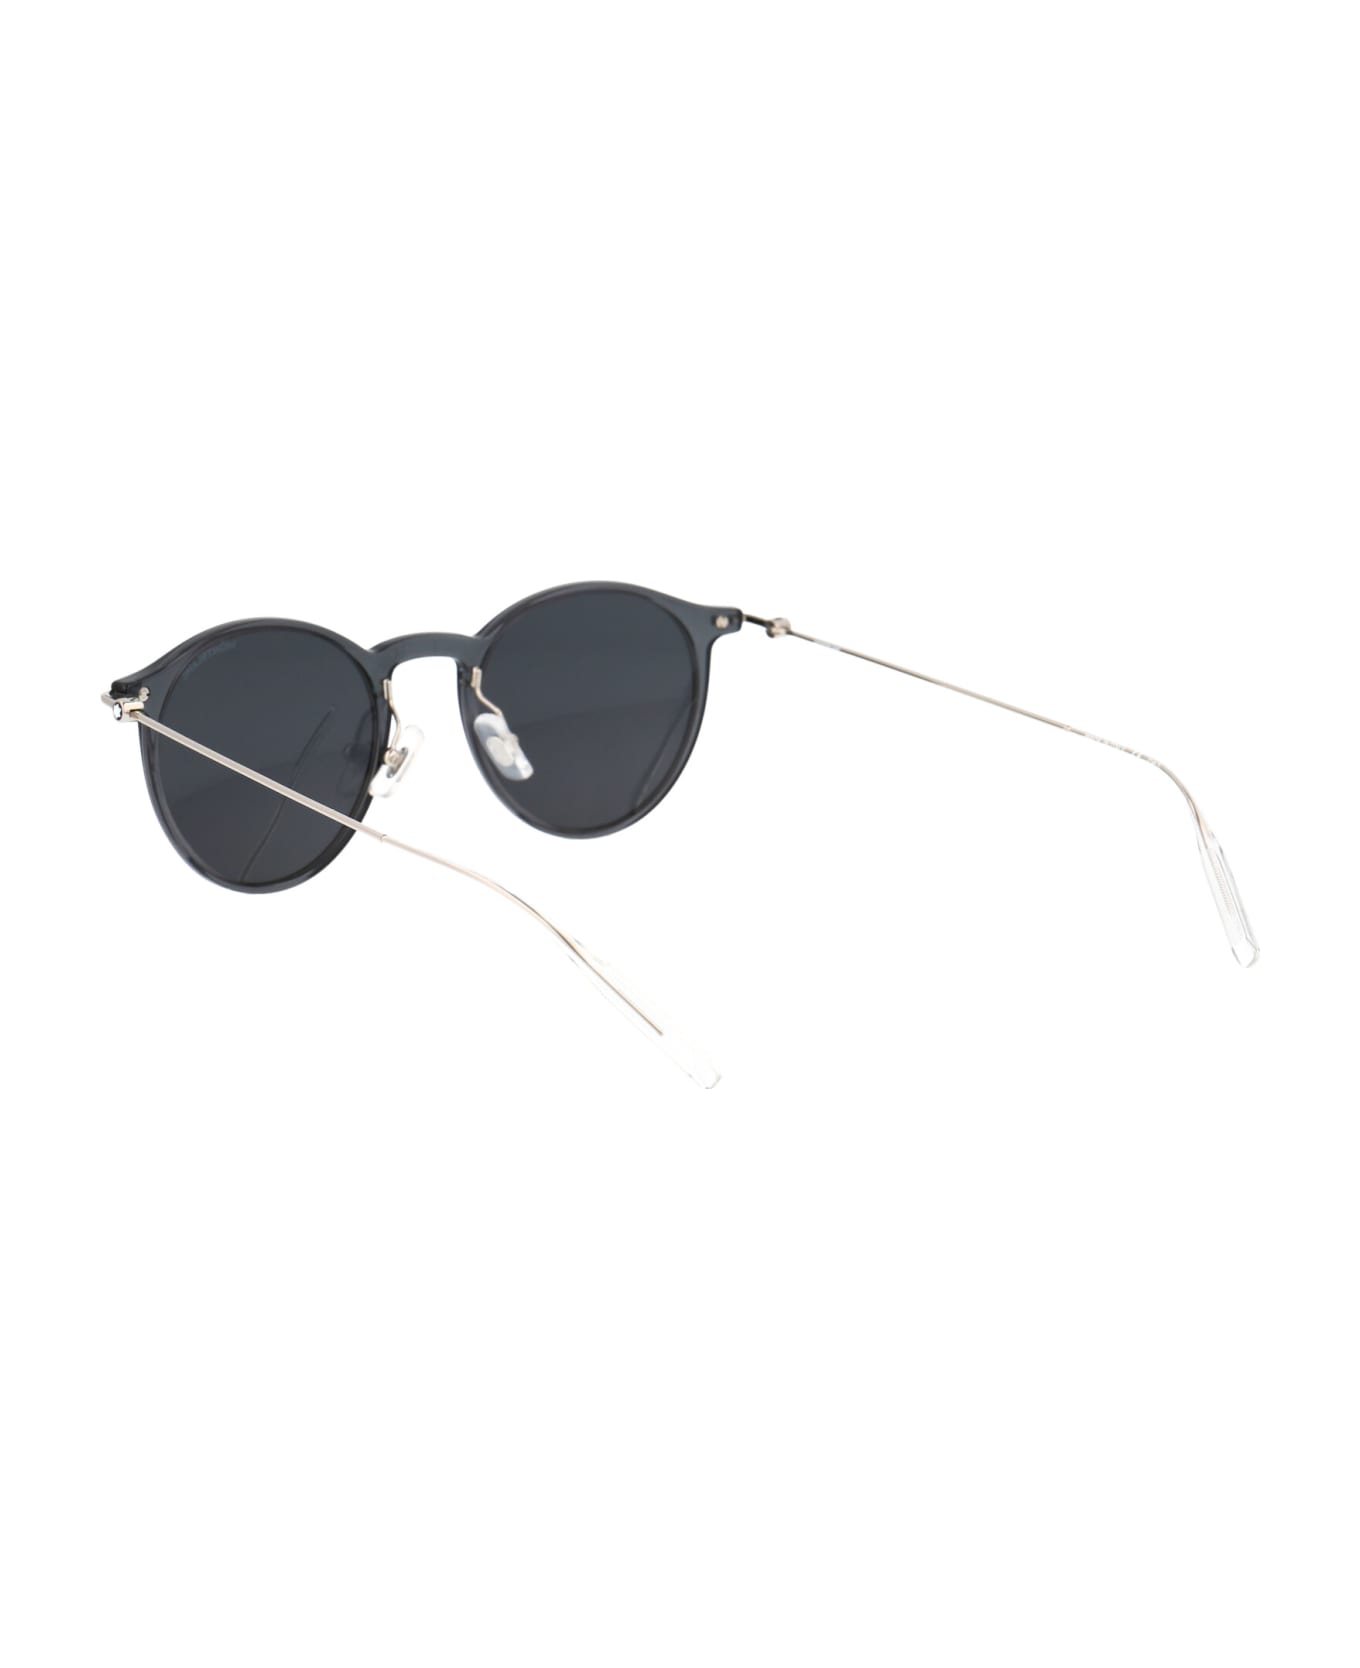 Montblanc Mb0097s Sunglasses - 001 GREY SILVER GREY